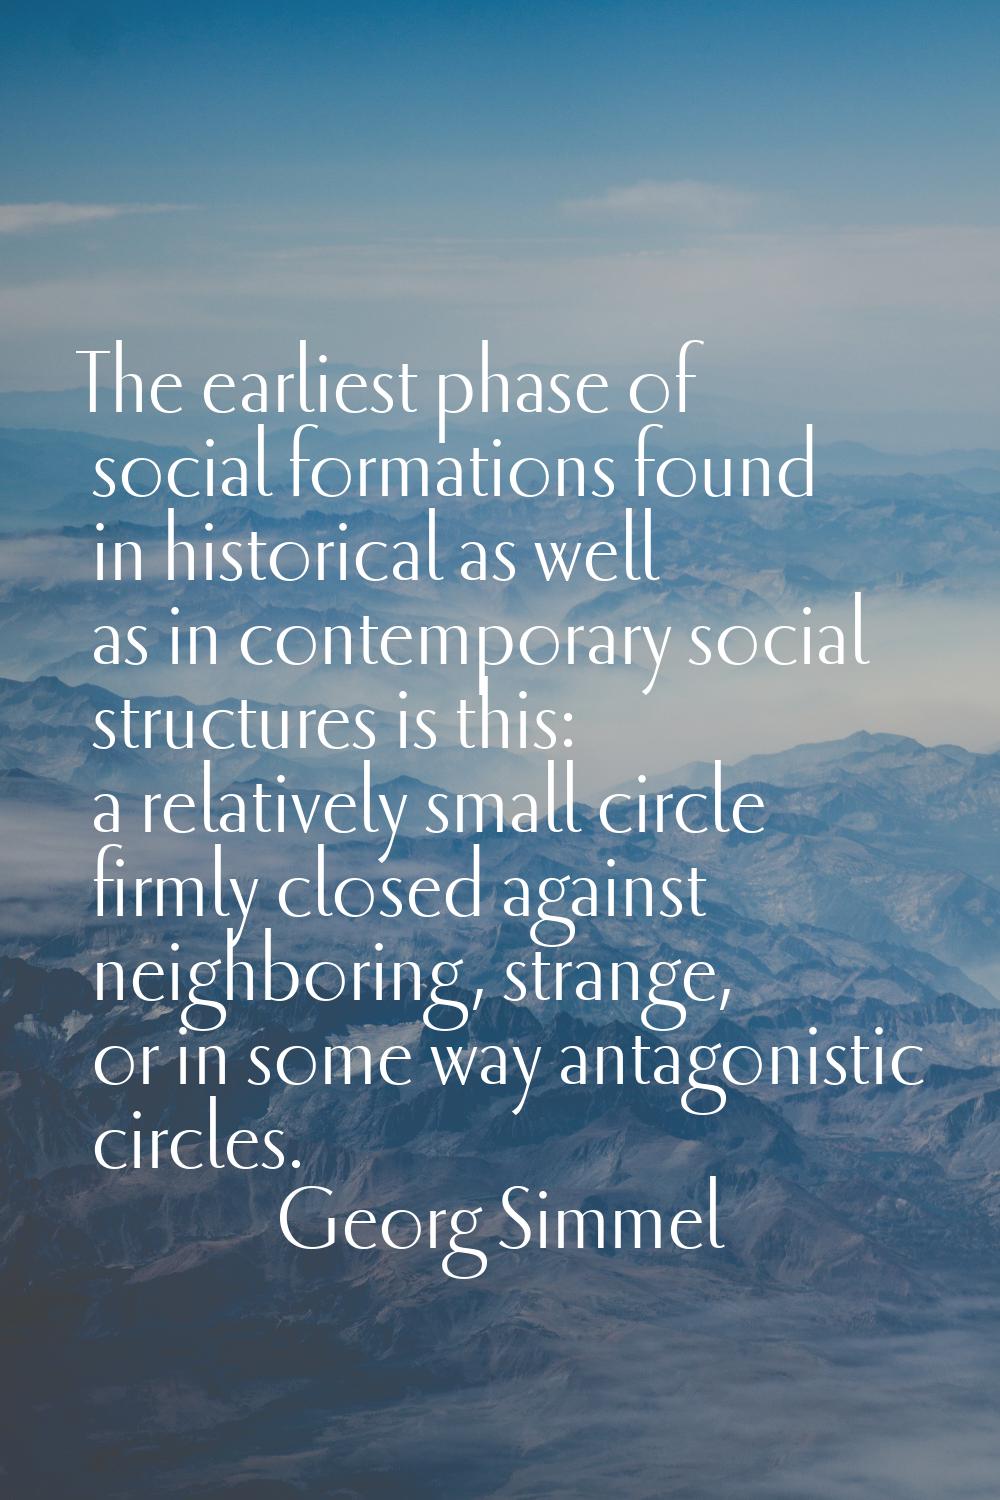 The earliest phase of social formations found in historical as well as in contemporary social struc